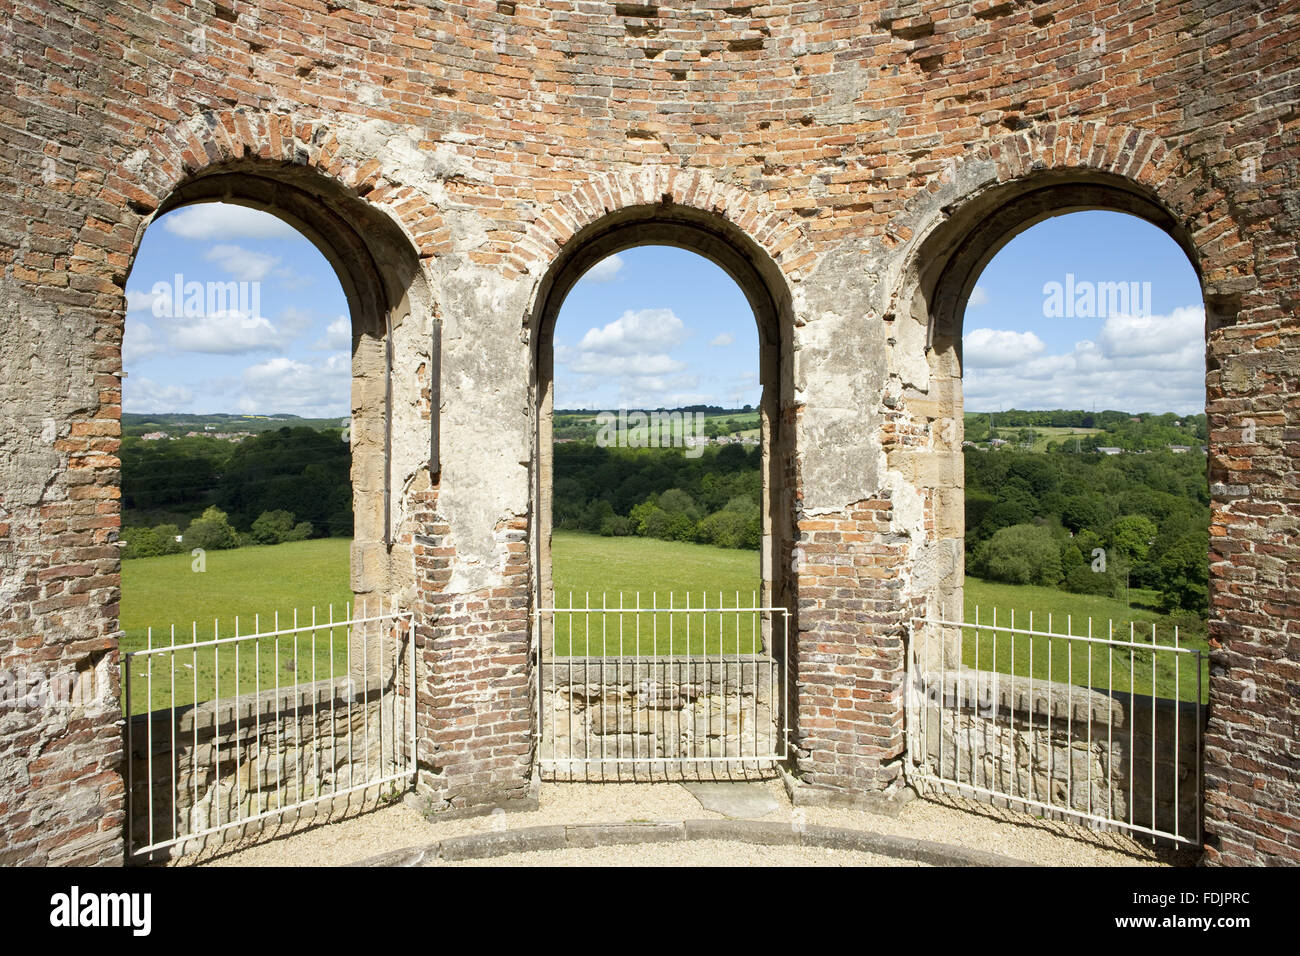 View from the Orangery over the landscape at Gibside, Newcastle upon Tyne. Stock Photo